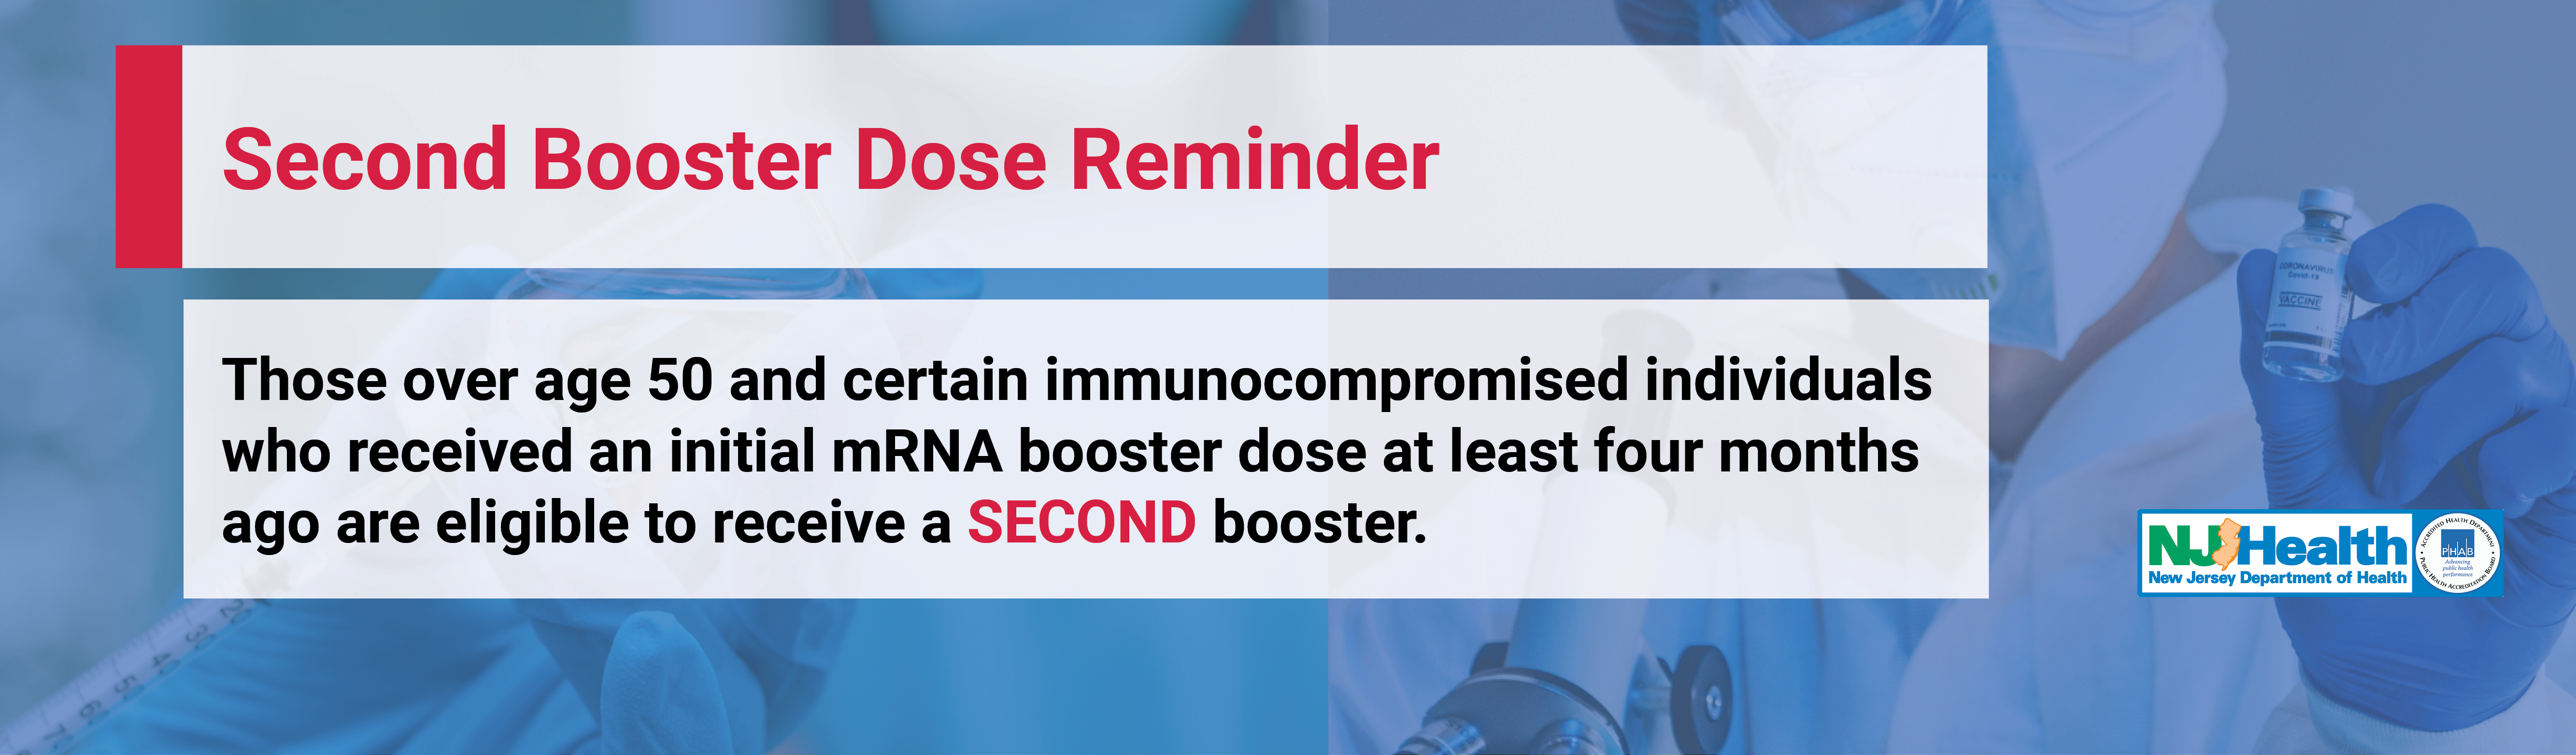 Second Booster Dose Reminder